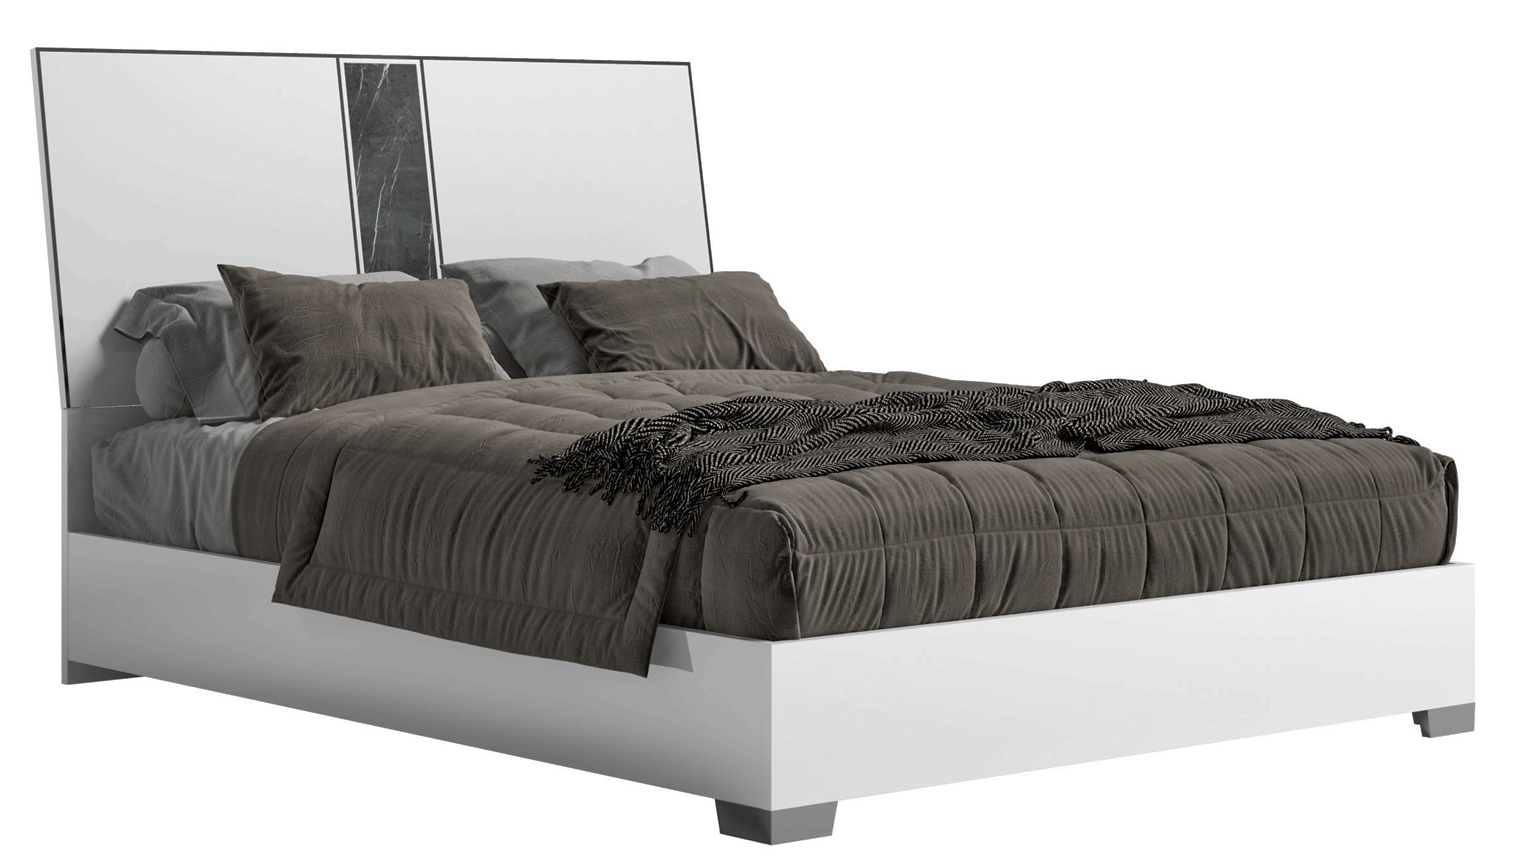 Bedroom Furniture Beds with storage Bianca Marble Bed